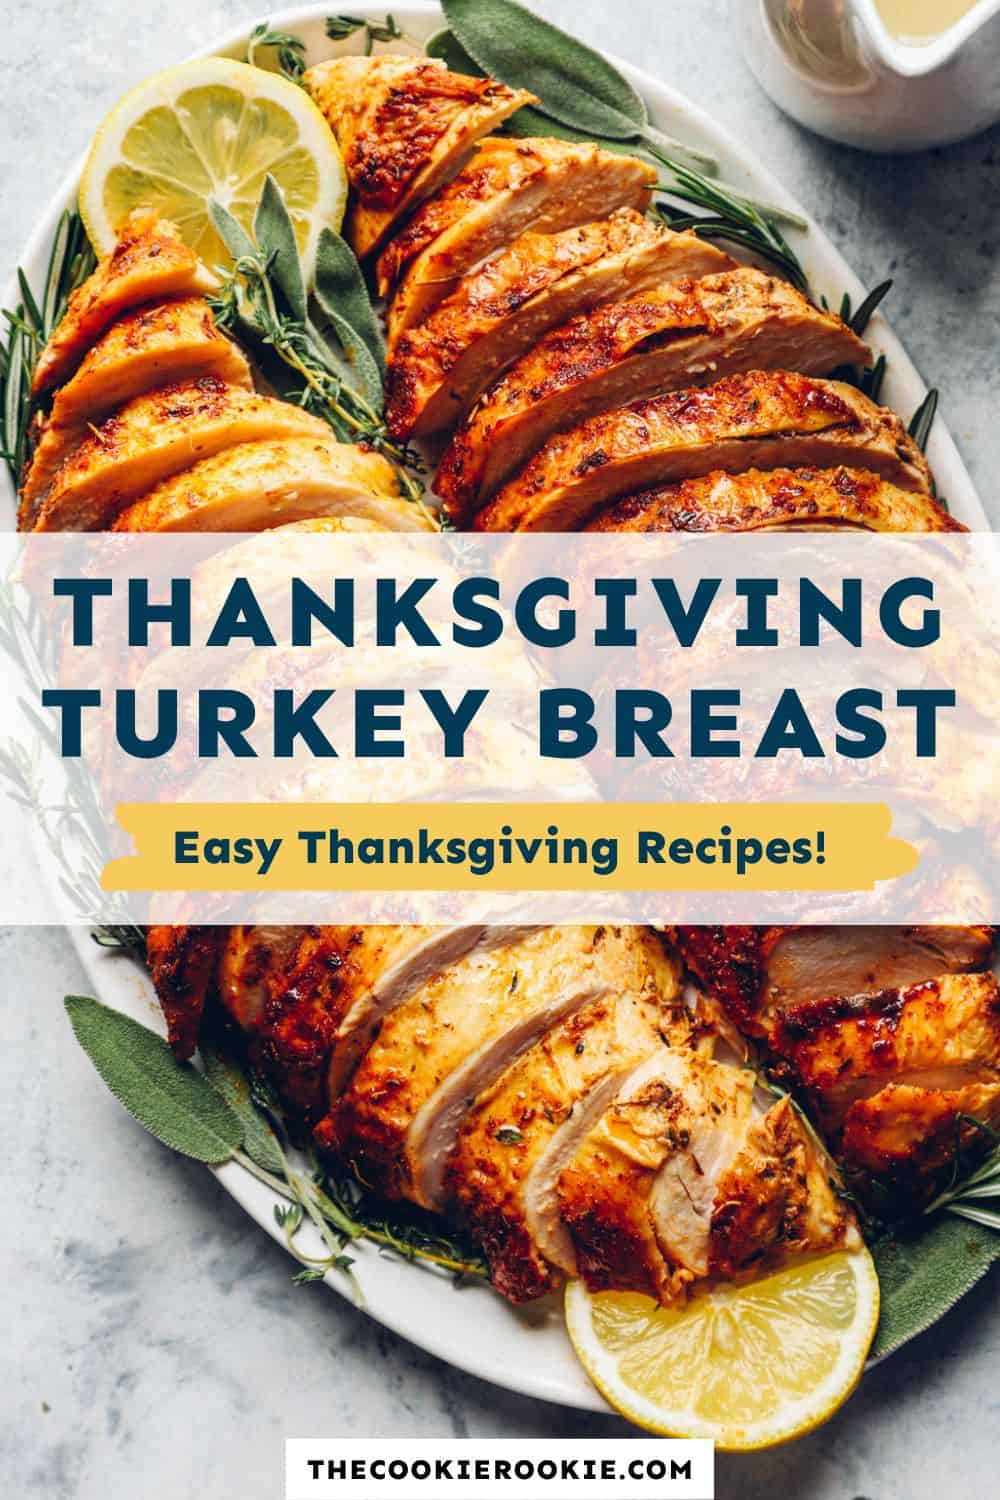 Thanksgiving Turkey Breast Recipe - The Cookie Rookie®